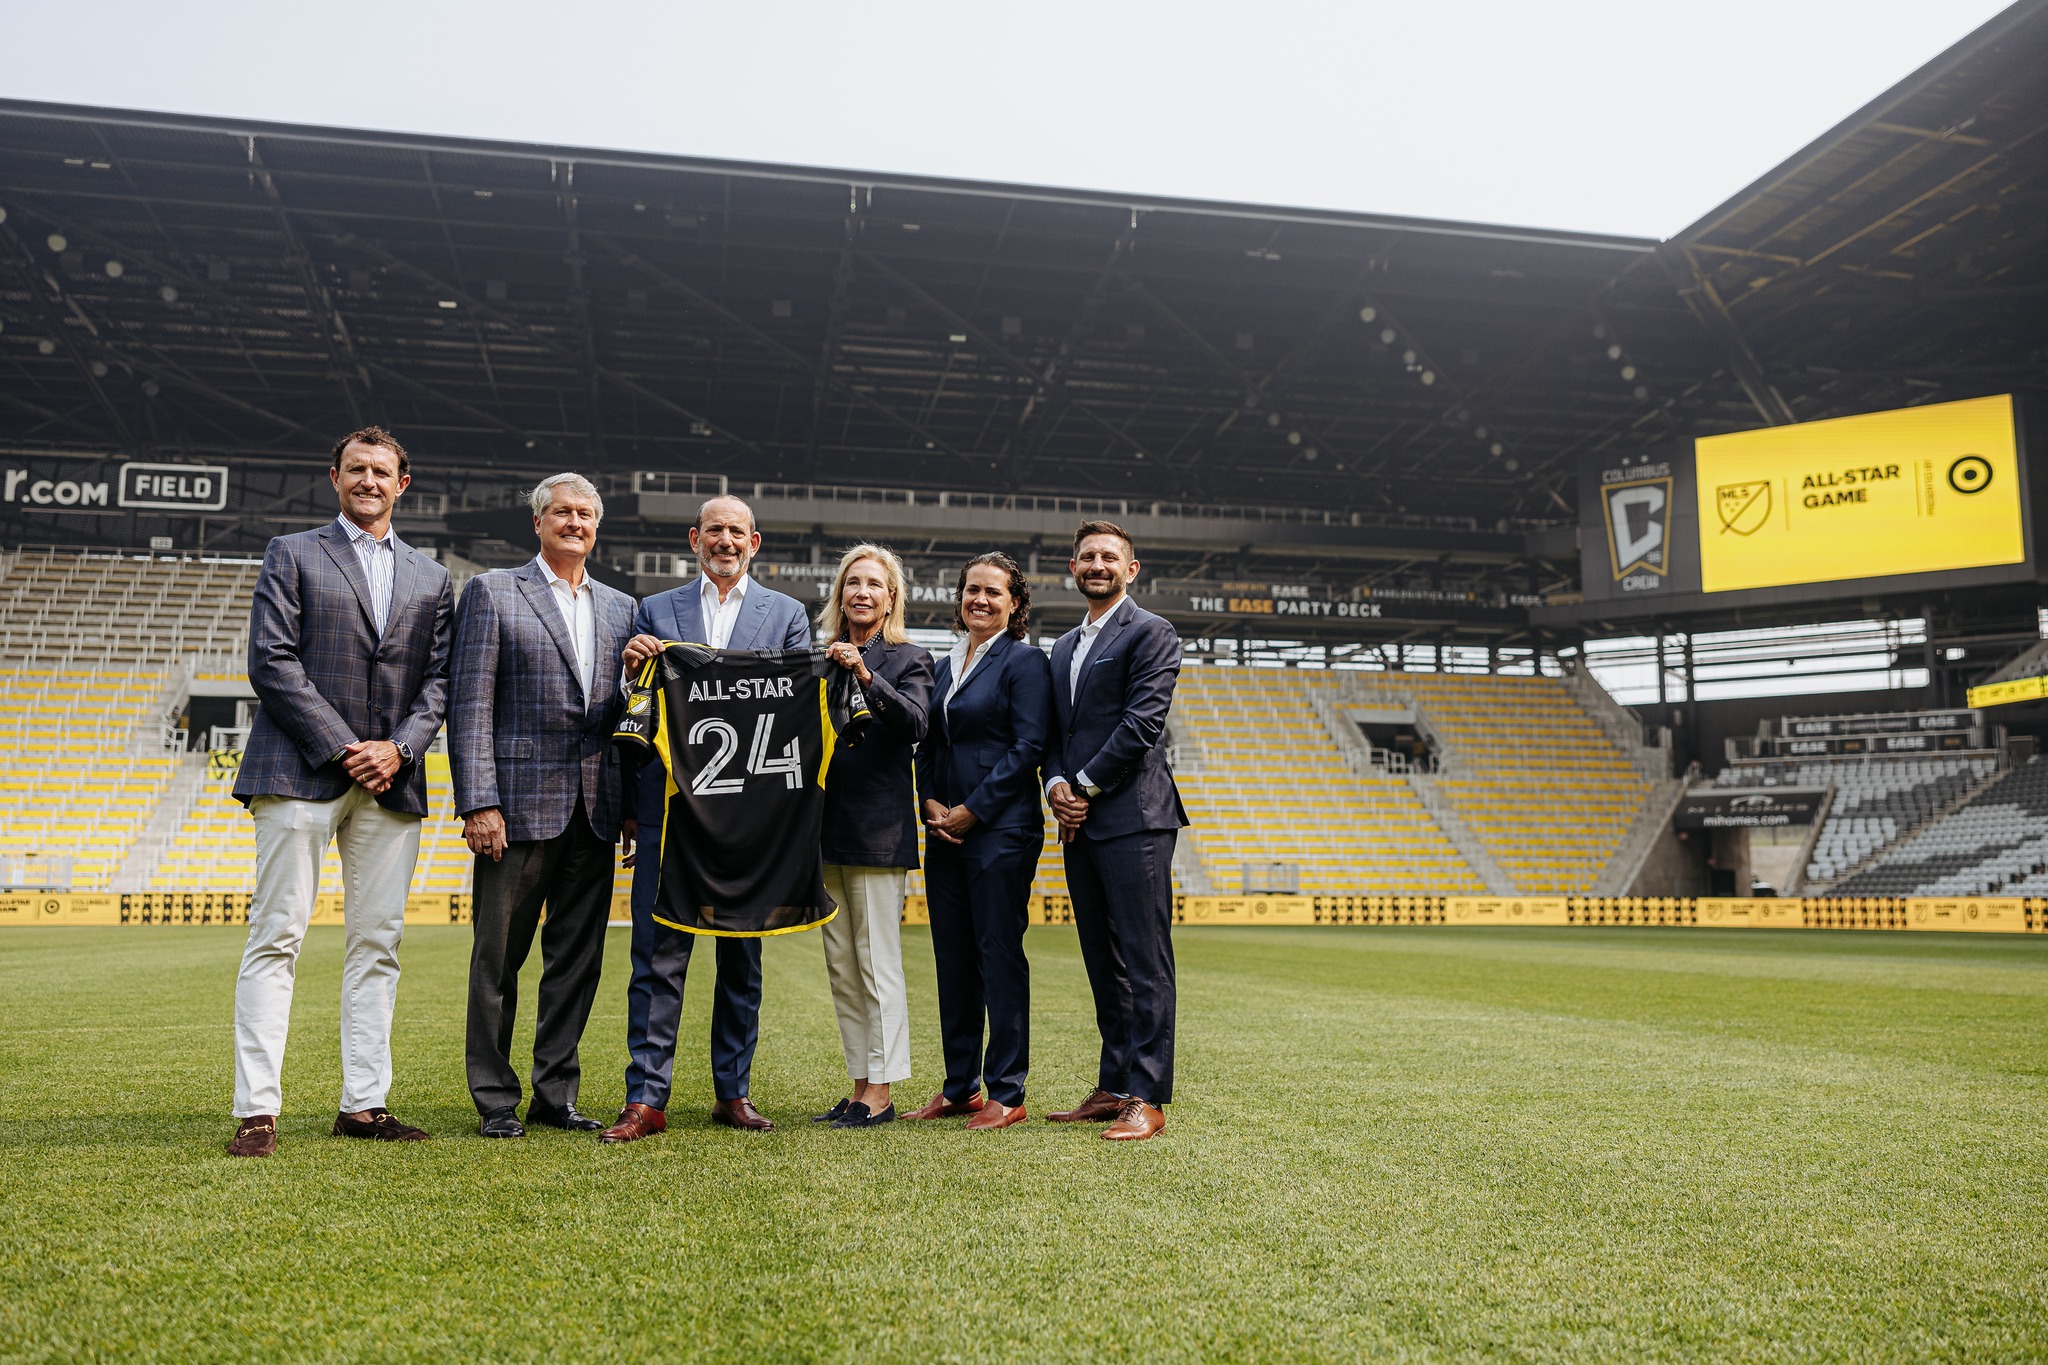 Columbus Crew to host 2024 Major League Soccer All Star game